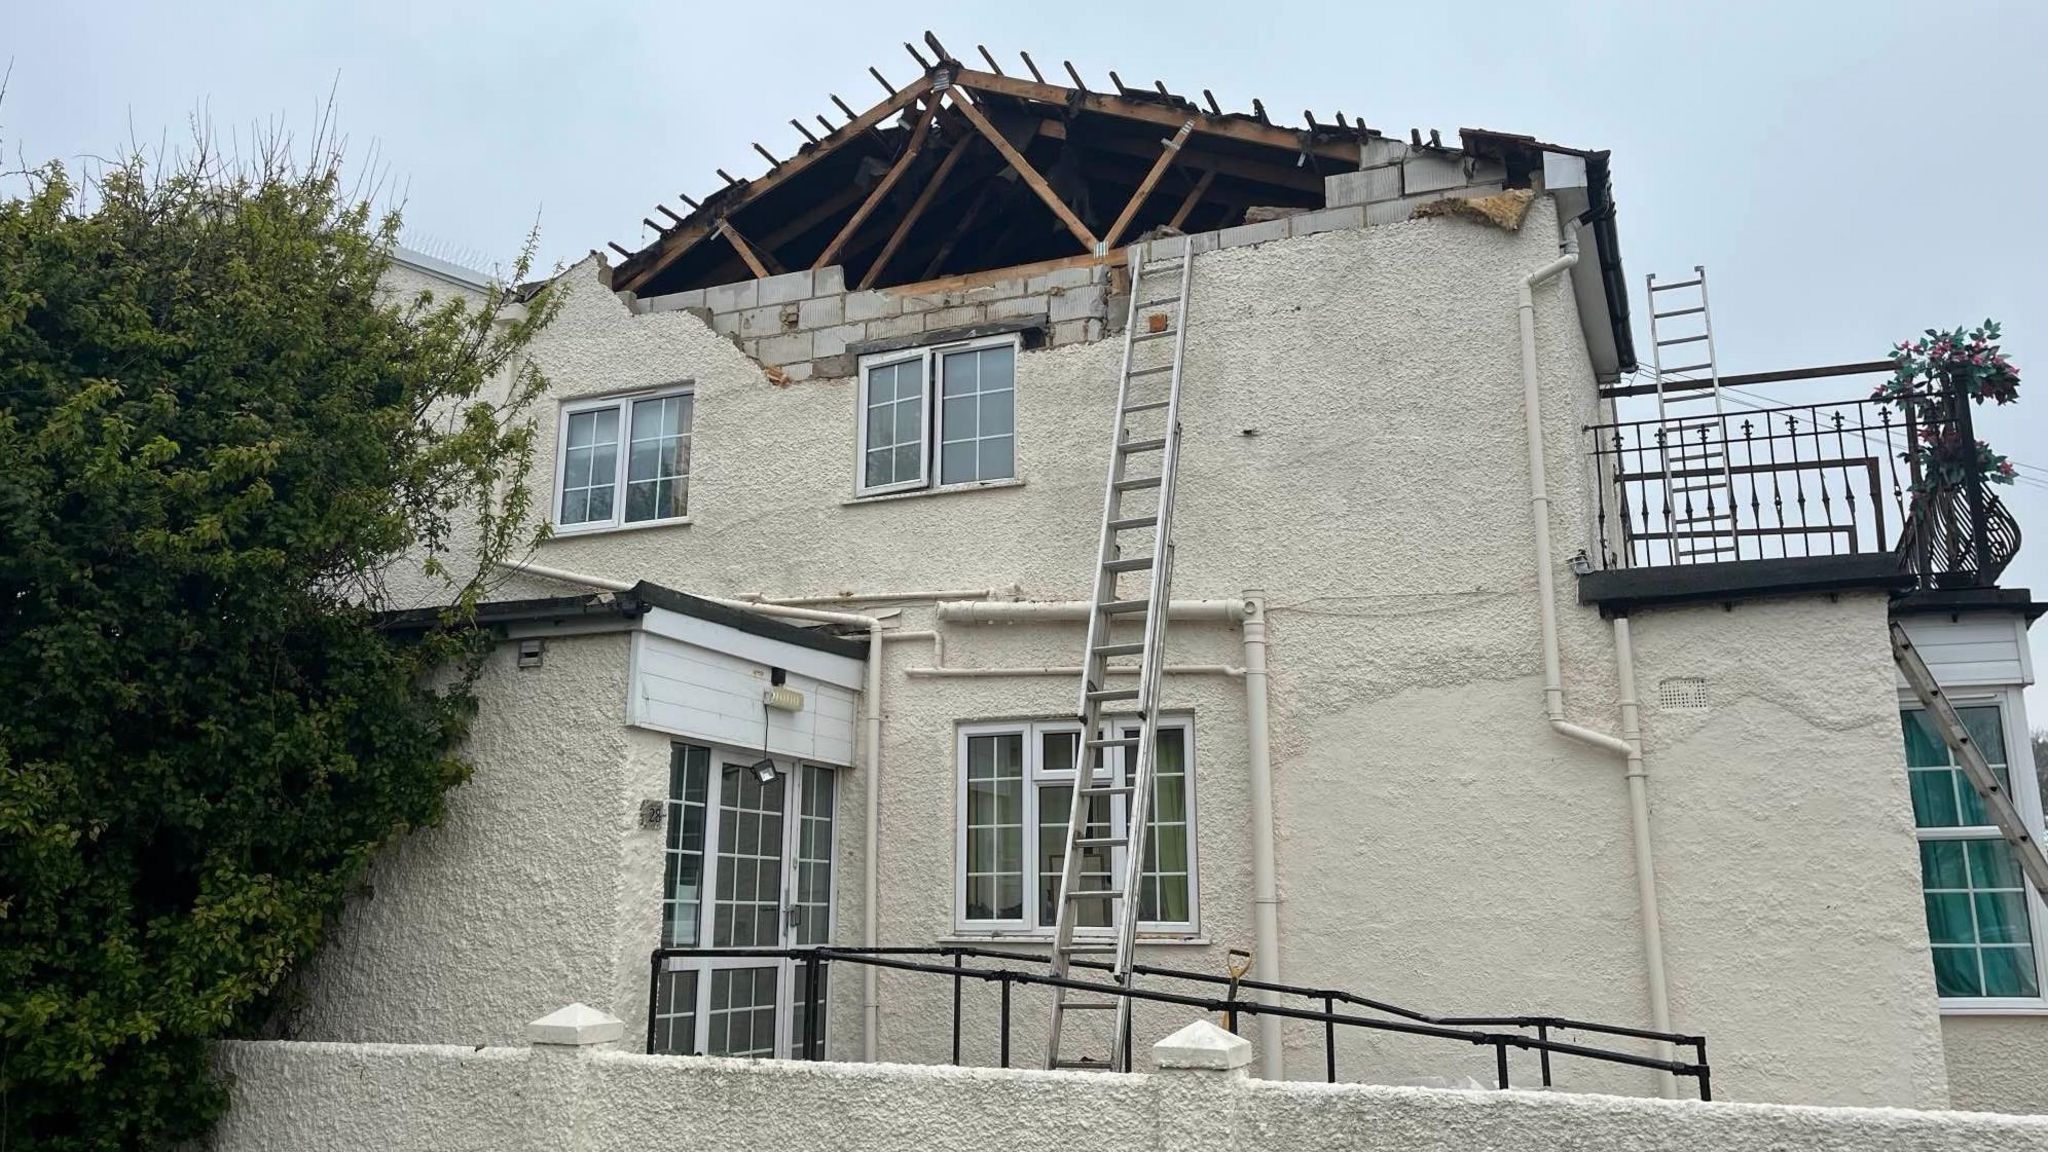 The damaged roof of a residential home in West Sussex after lightning strikes